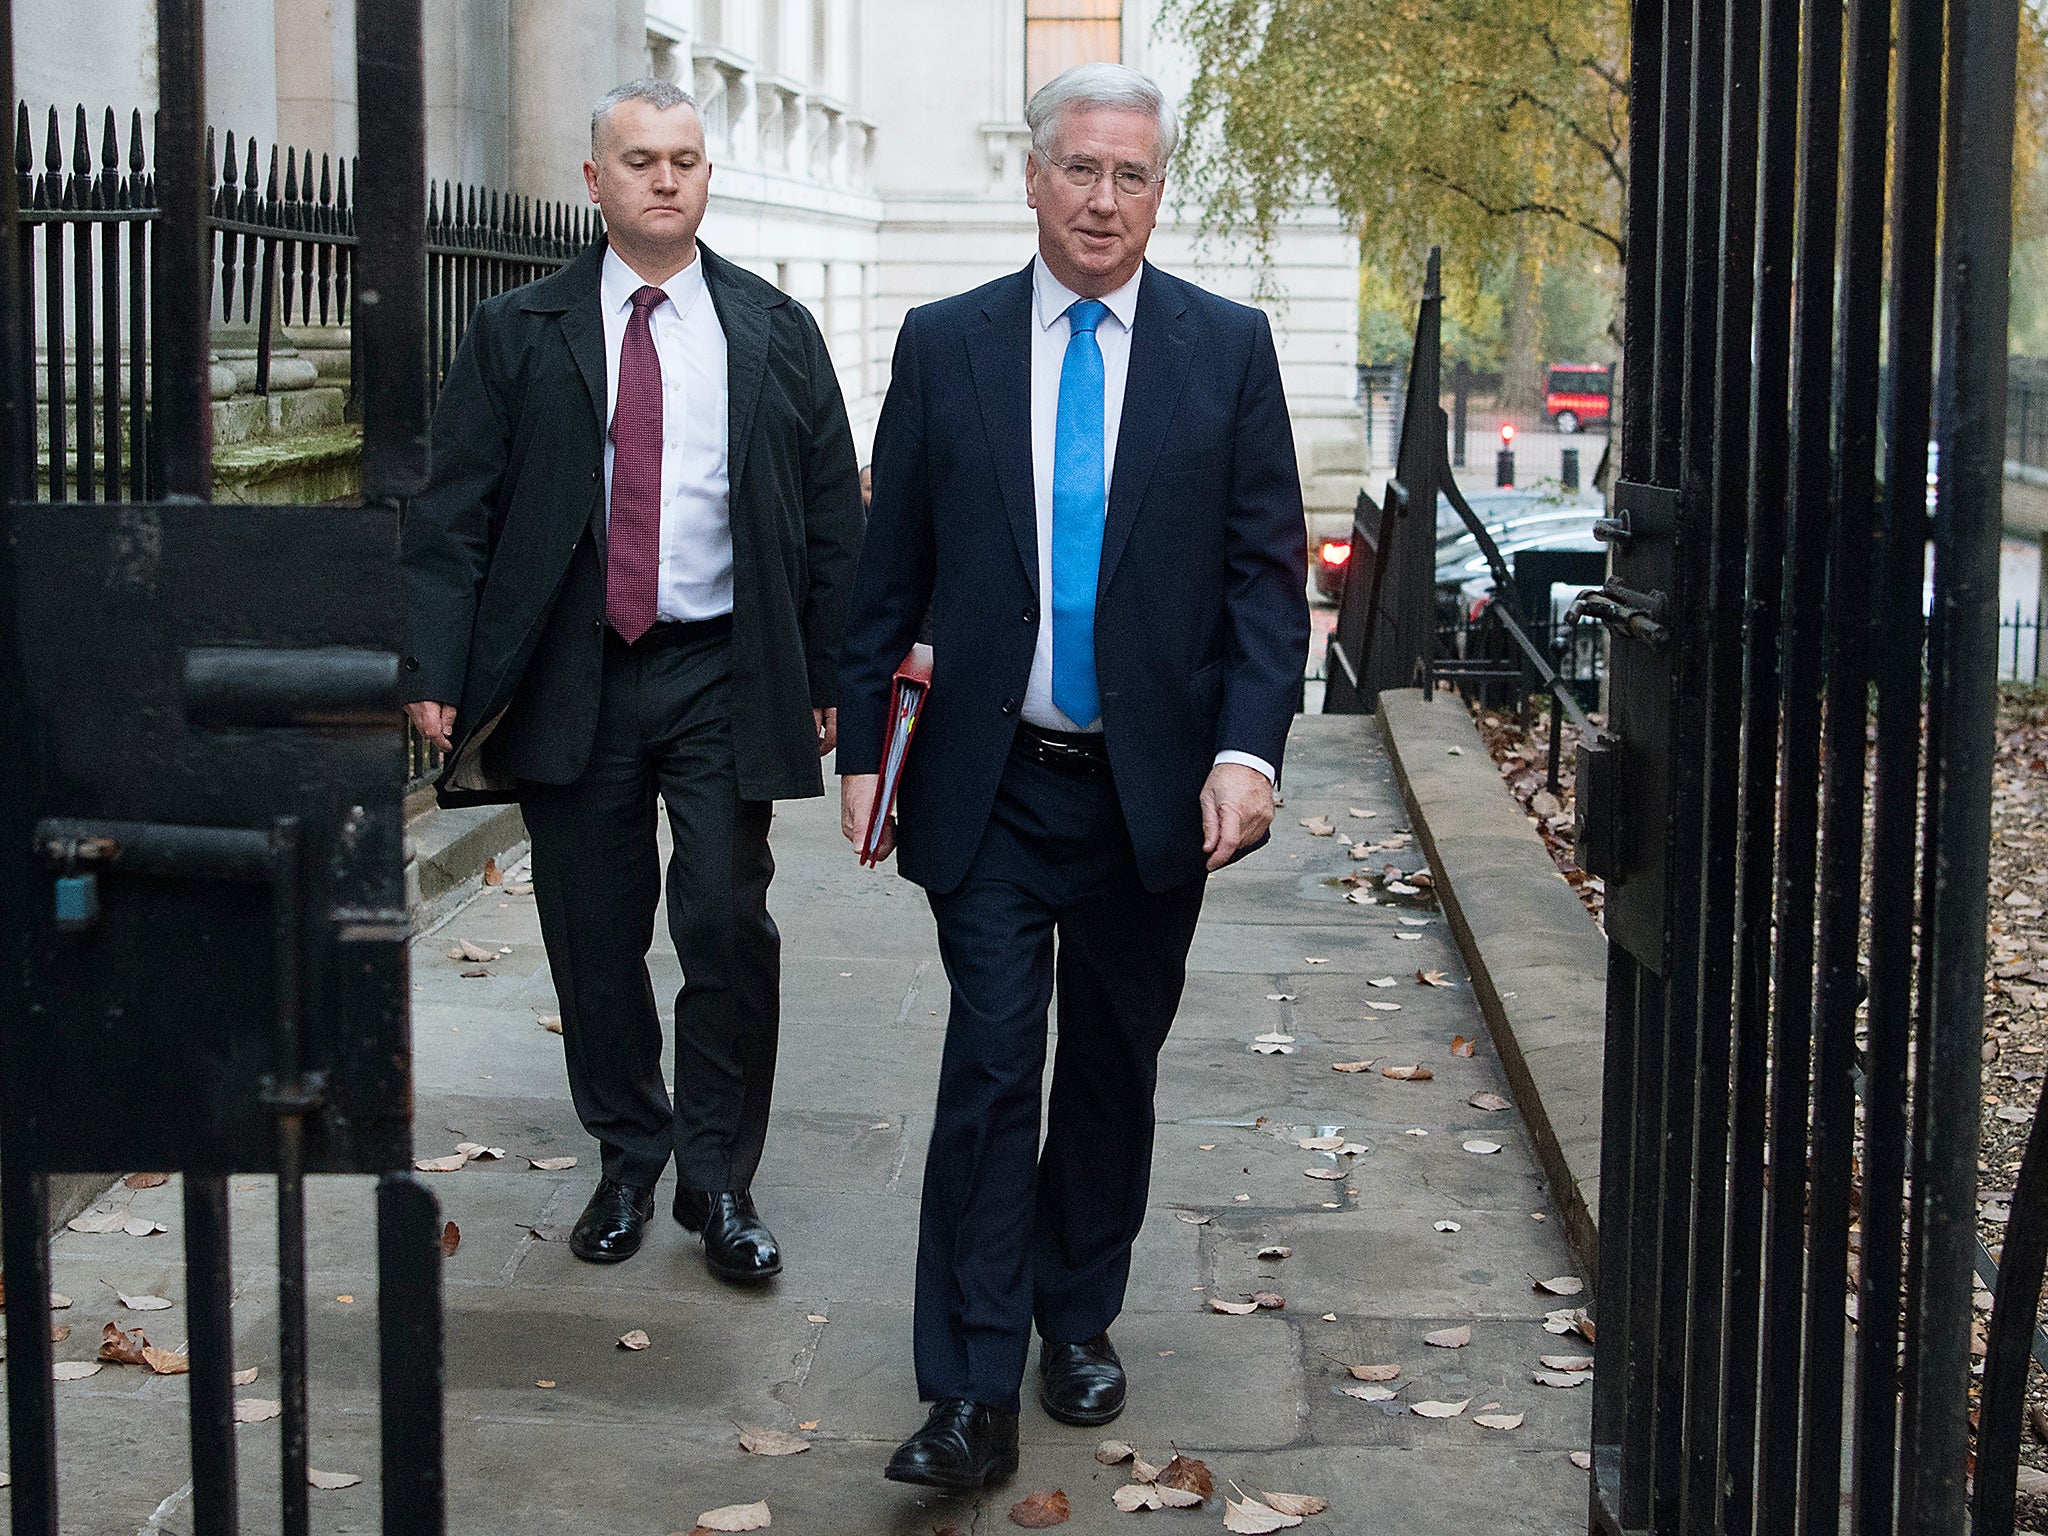 Michael Fallon welcomed Riyadh’s confirmation it will not use further BL-755 cluster munitions